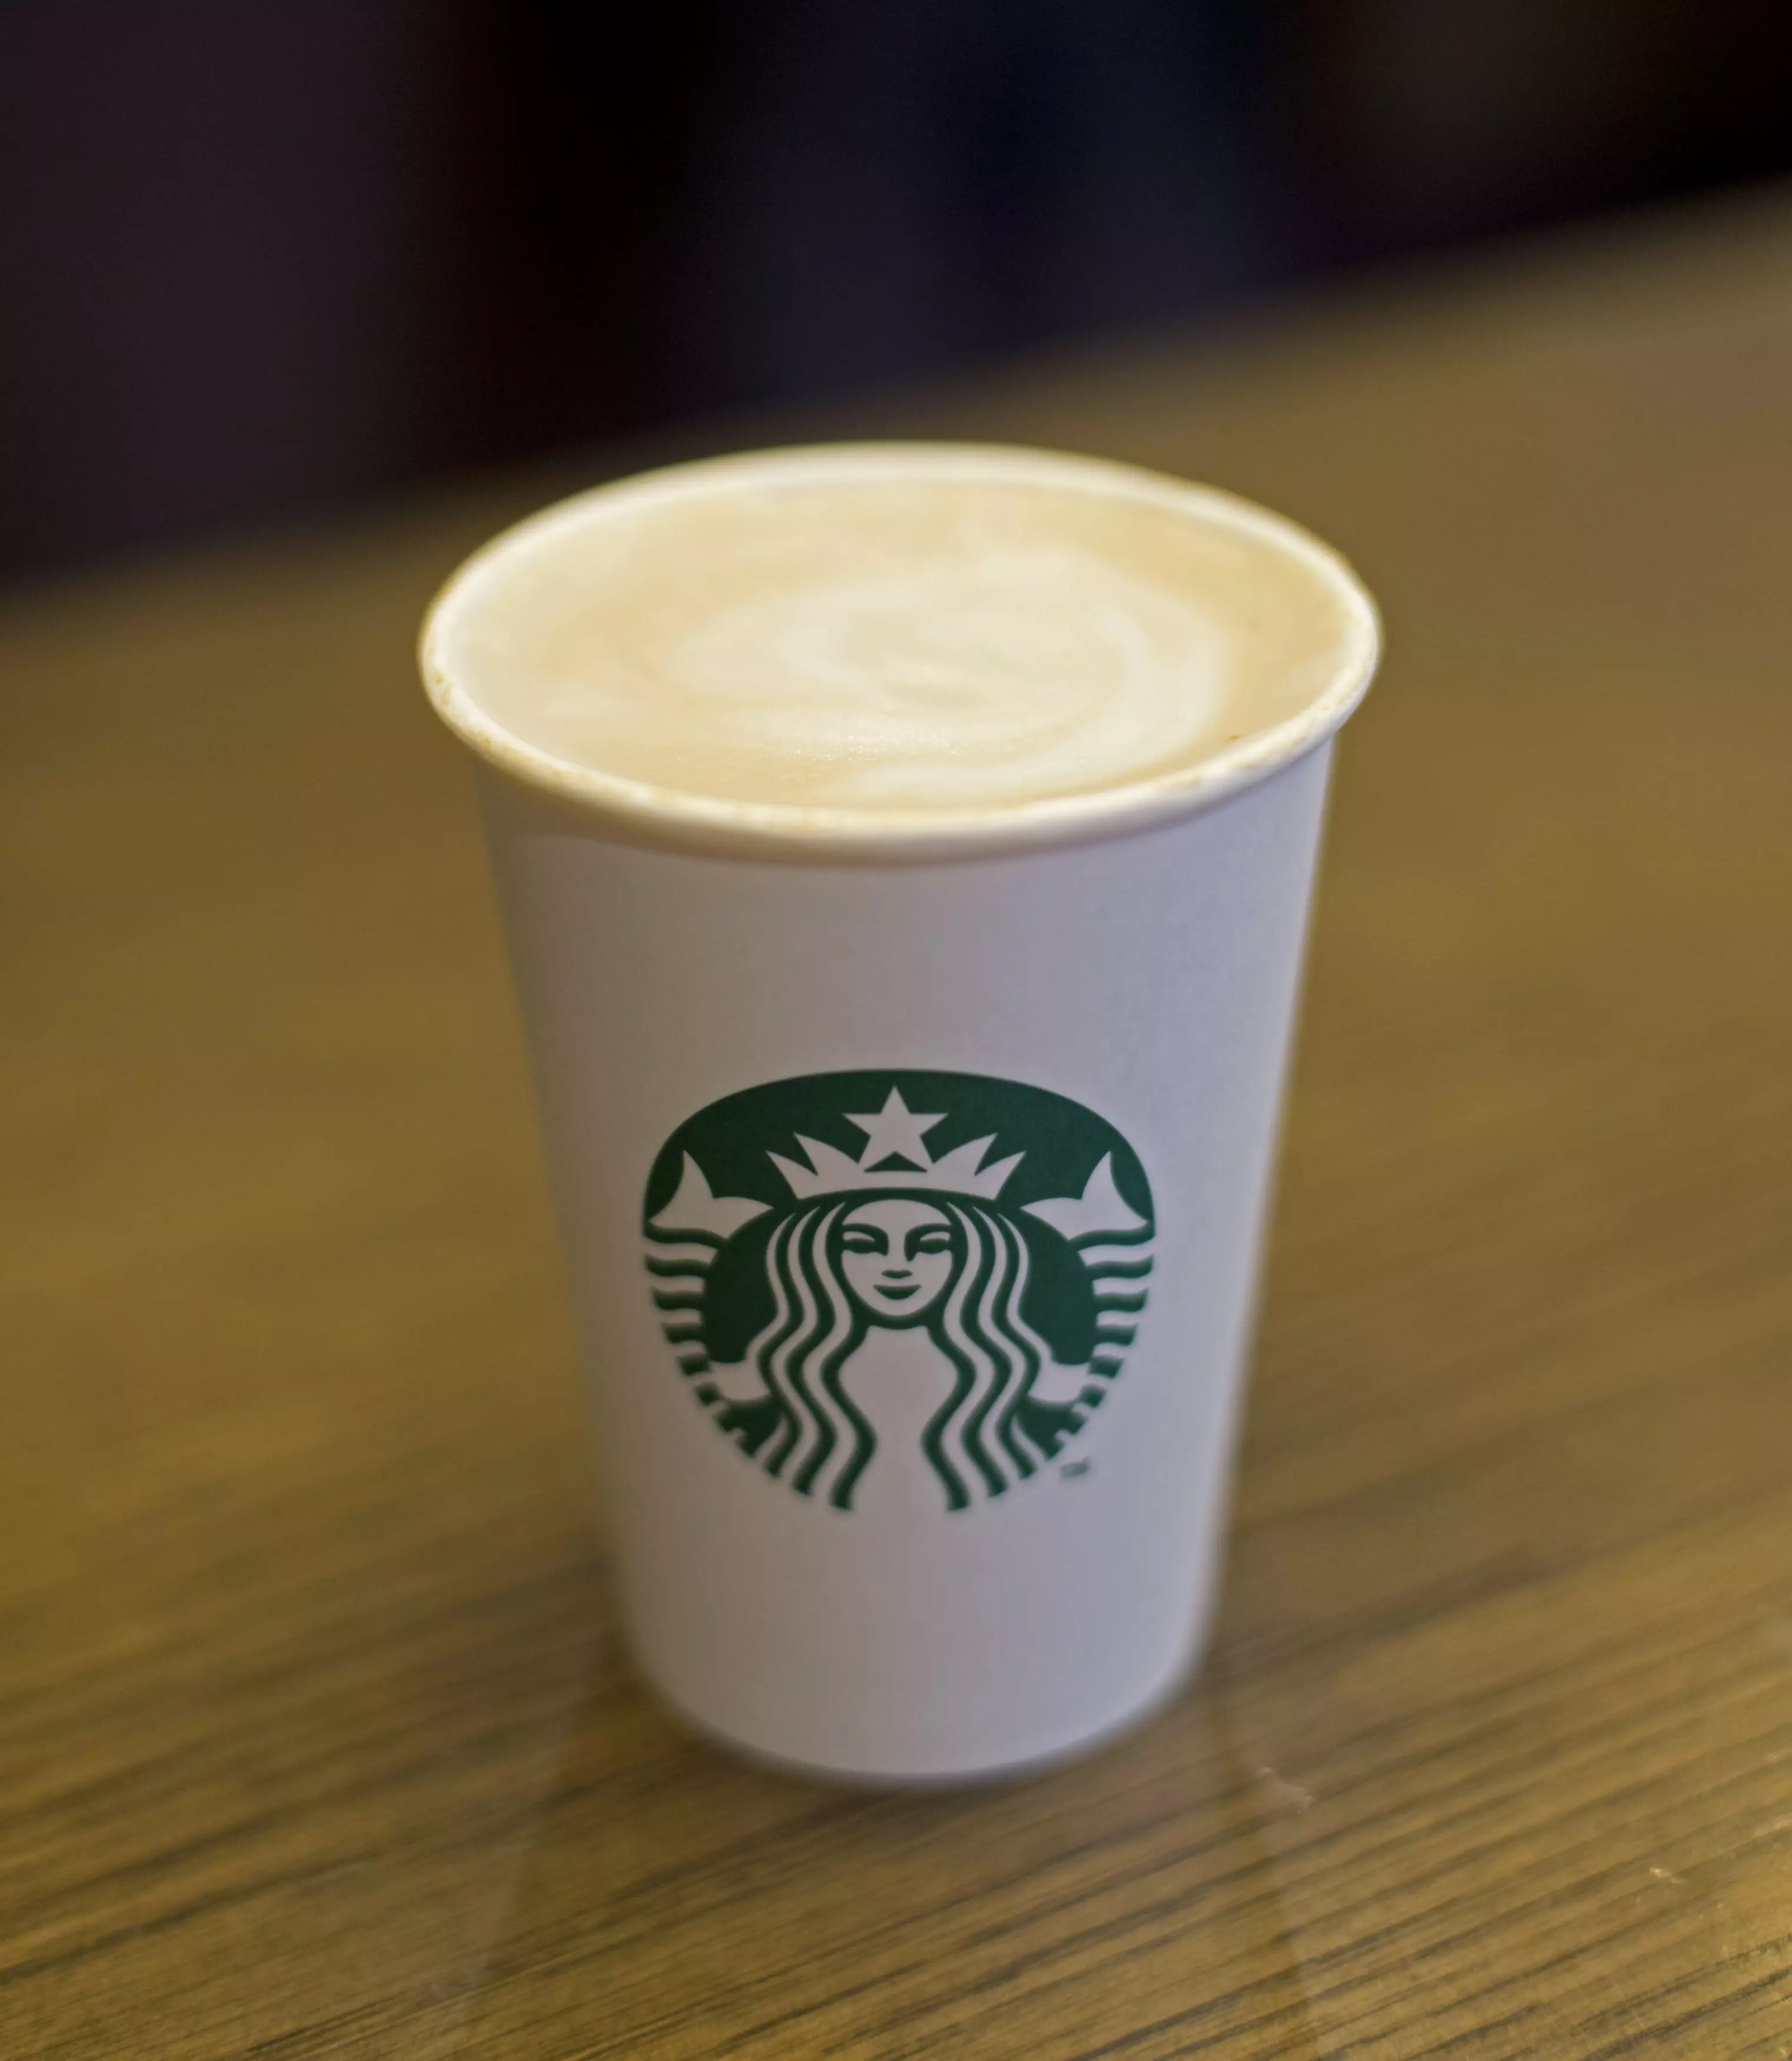 NHS and RST staff can order a tall filter coffee from Starbucks and it will be totally free (